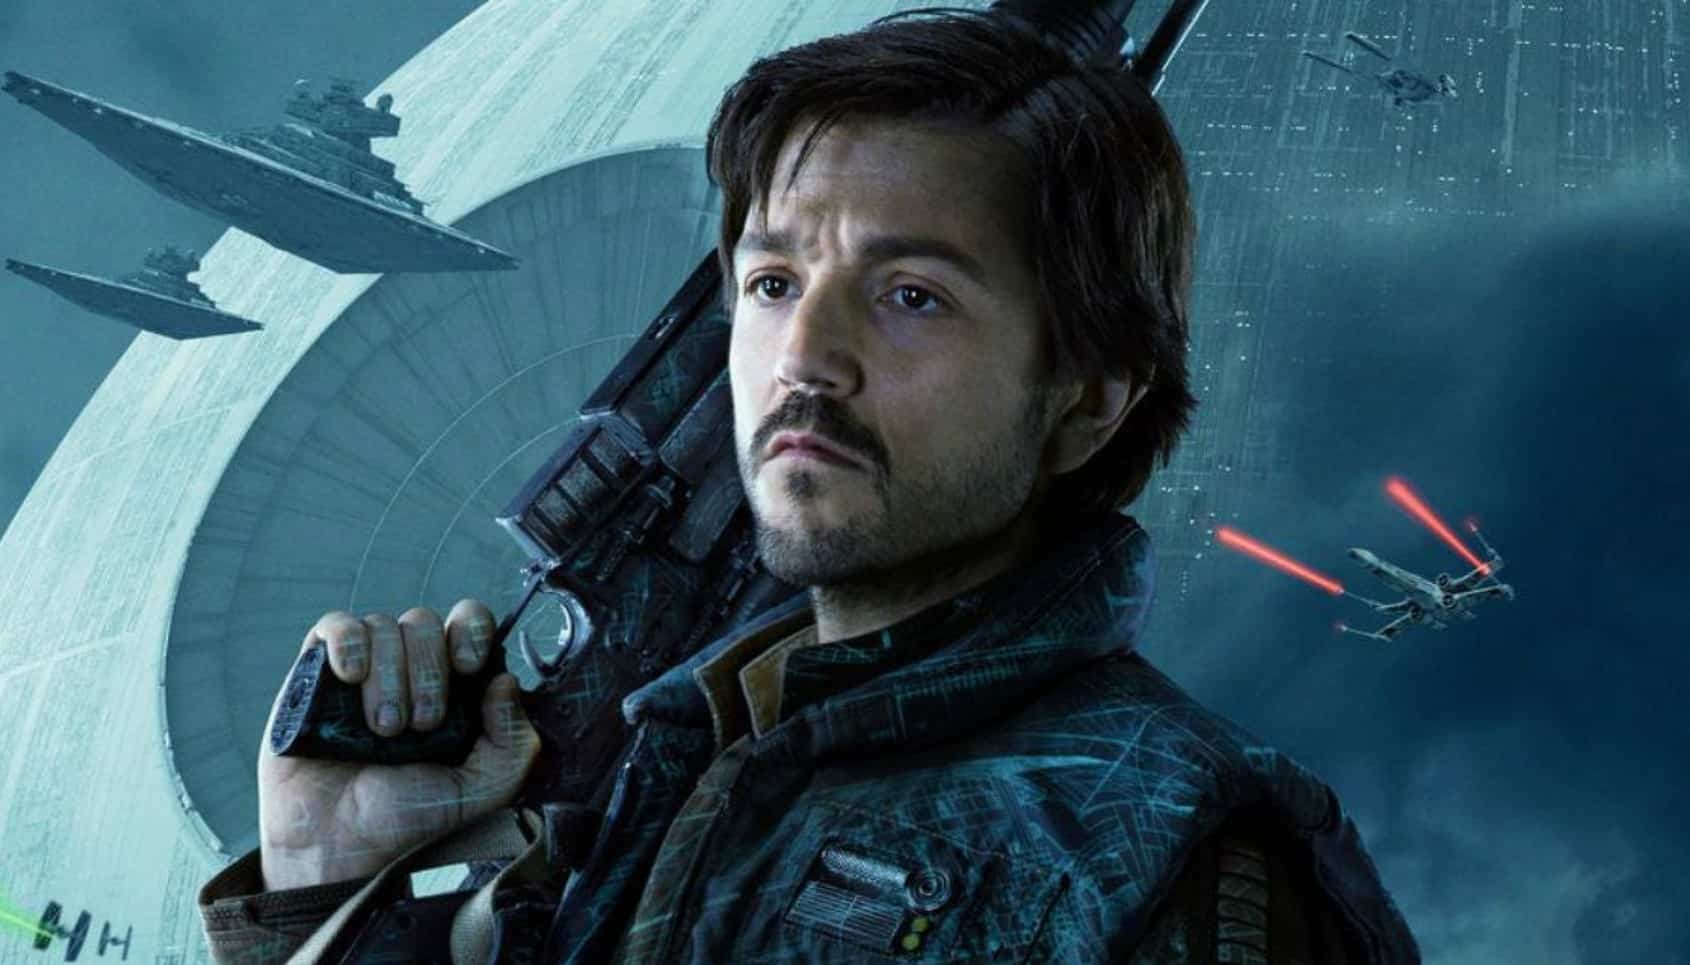 Diego Luna as Andor in Rogue One, due to get his own Disney+ Star Wars show